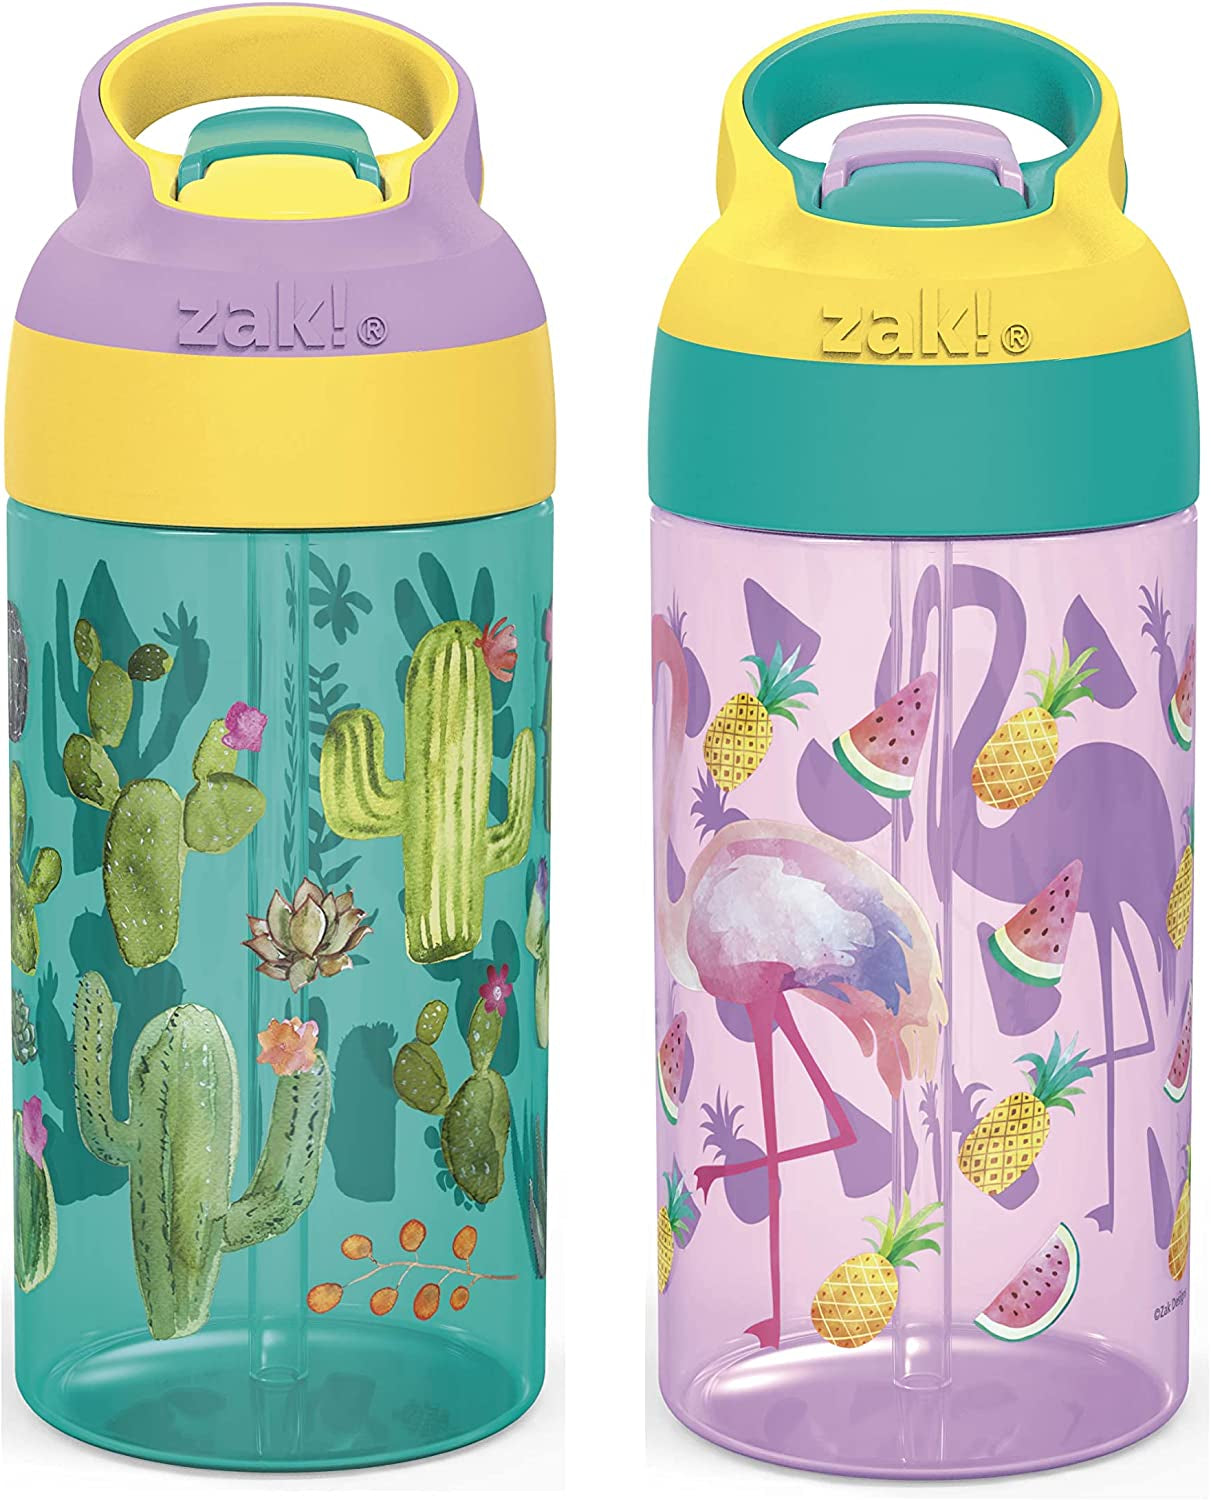 16Oz Riverside Beach Life Kids Water Bottle with Straw and Built in Carrying Loop Made of Durable Plastic, Leak-Proof Design for Travel, 2PK Set